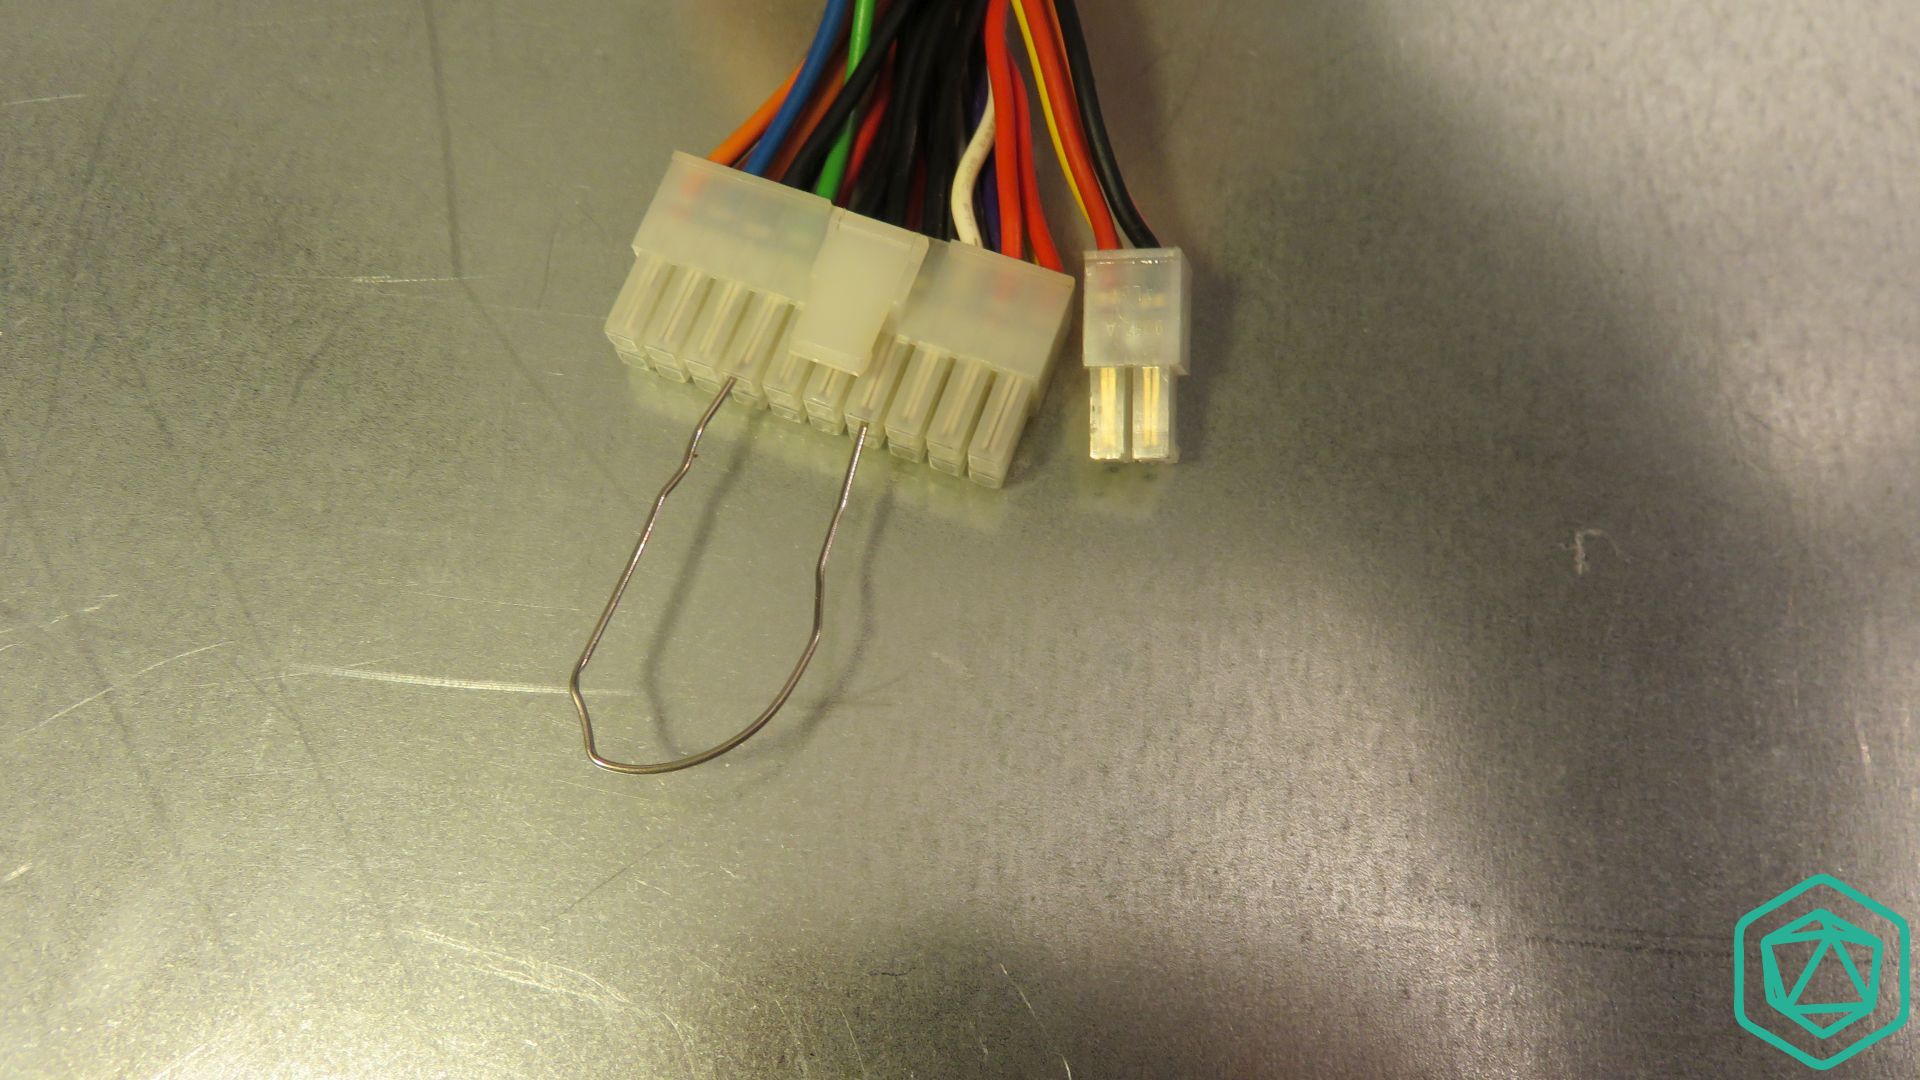 Pc Power Switch Connector Ground - AtxPsuConvertion 011